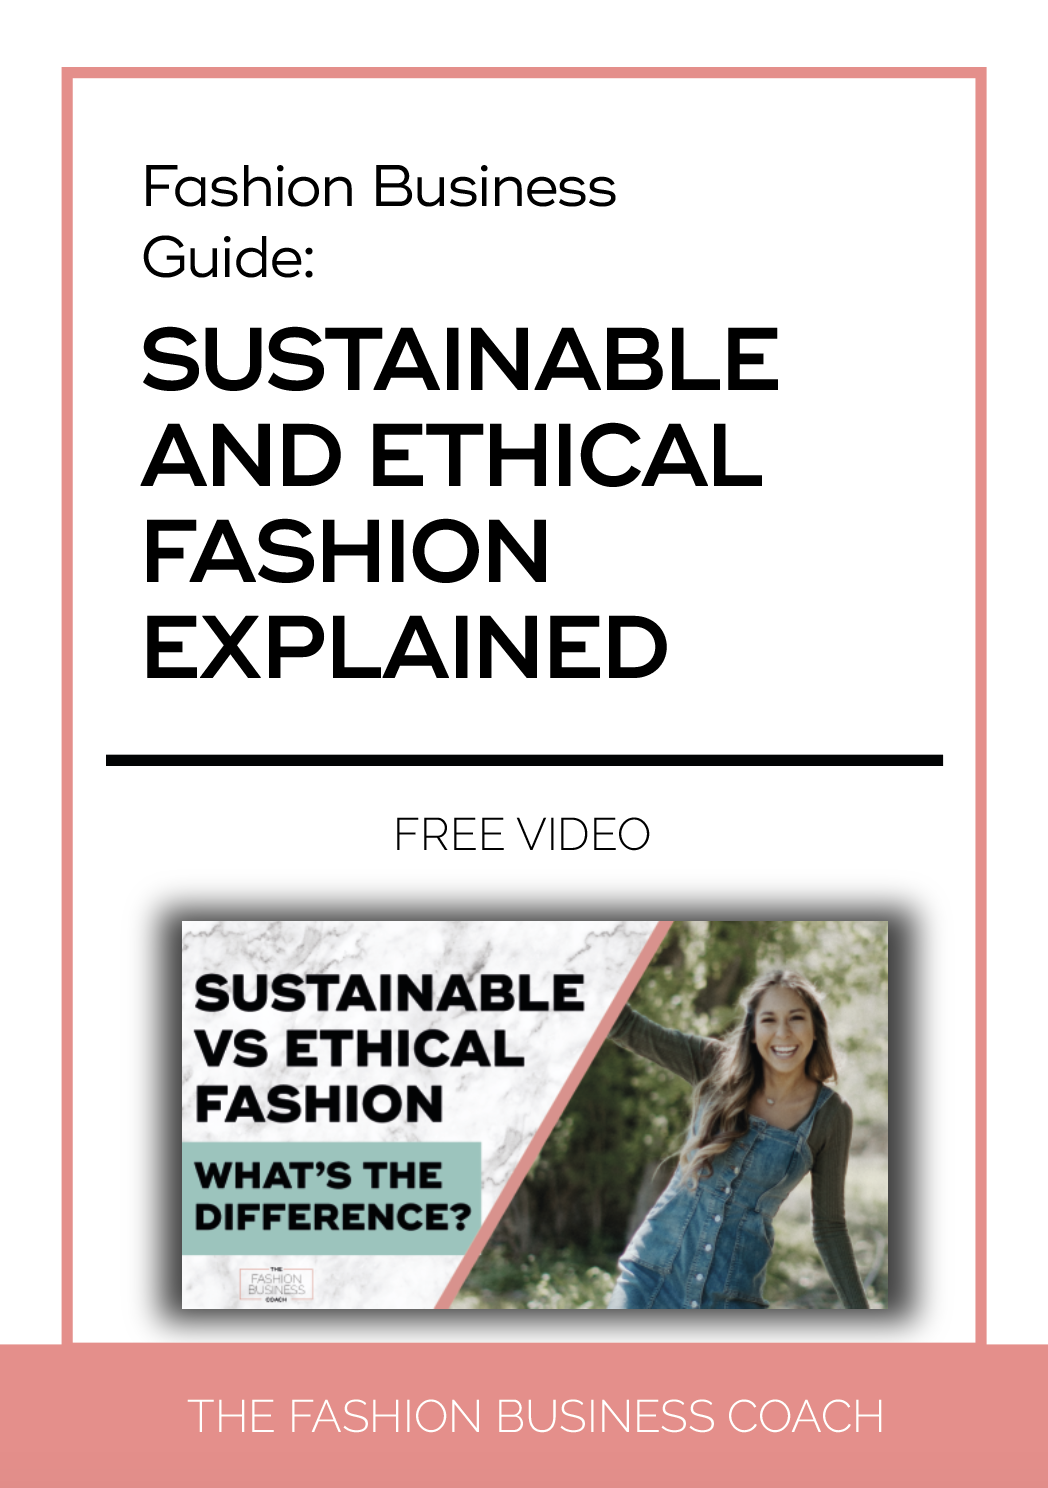 Fashion Business Guide Sustainable and Ethical Fashion Explained 4.png